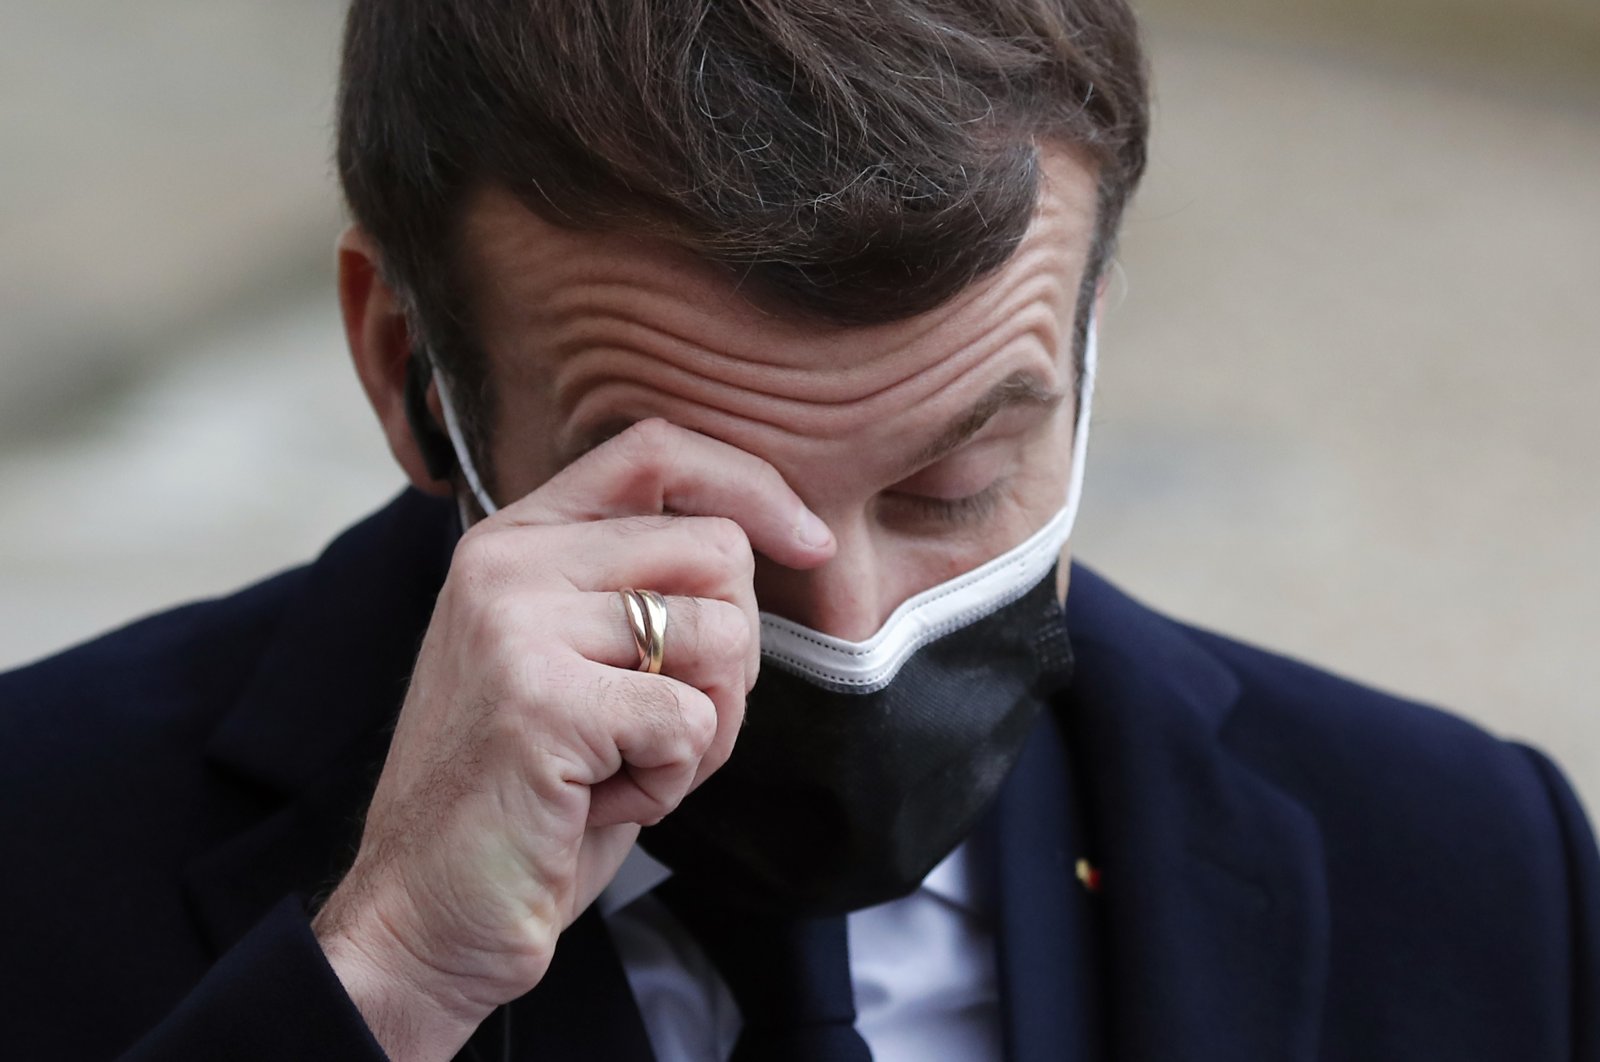 French President Emmanuel Macron reacts as he listen to the speech of Portuguese Prime Minister Antonio Costa, Wednesday, Dec. 16, 2020 in Paris. (AP Photo)